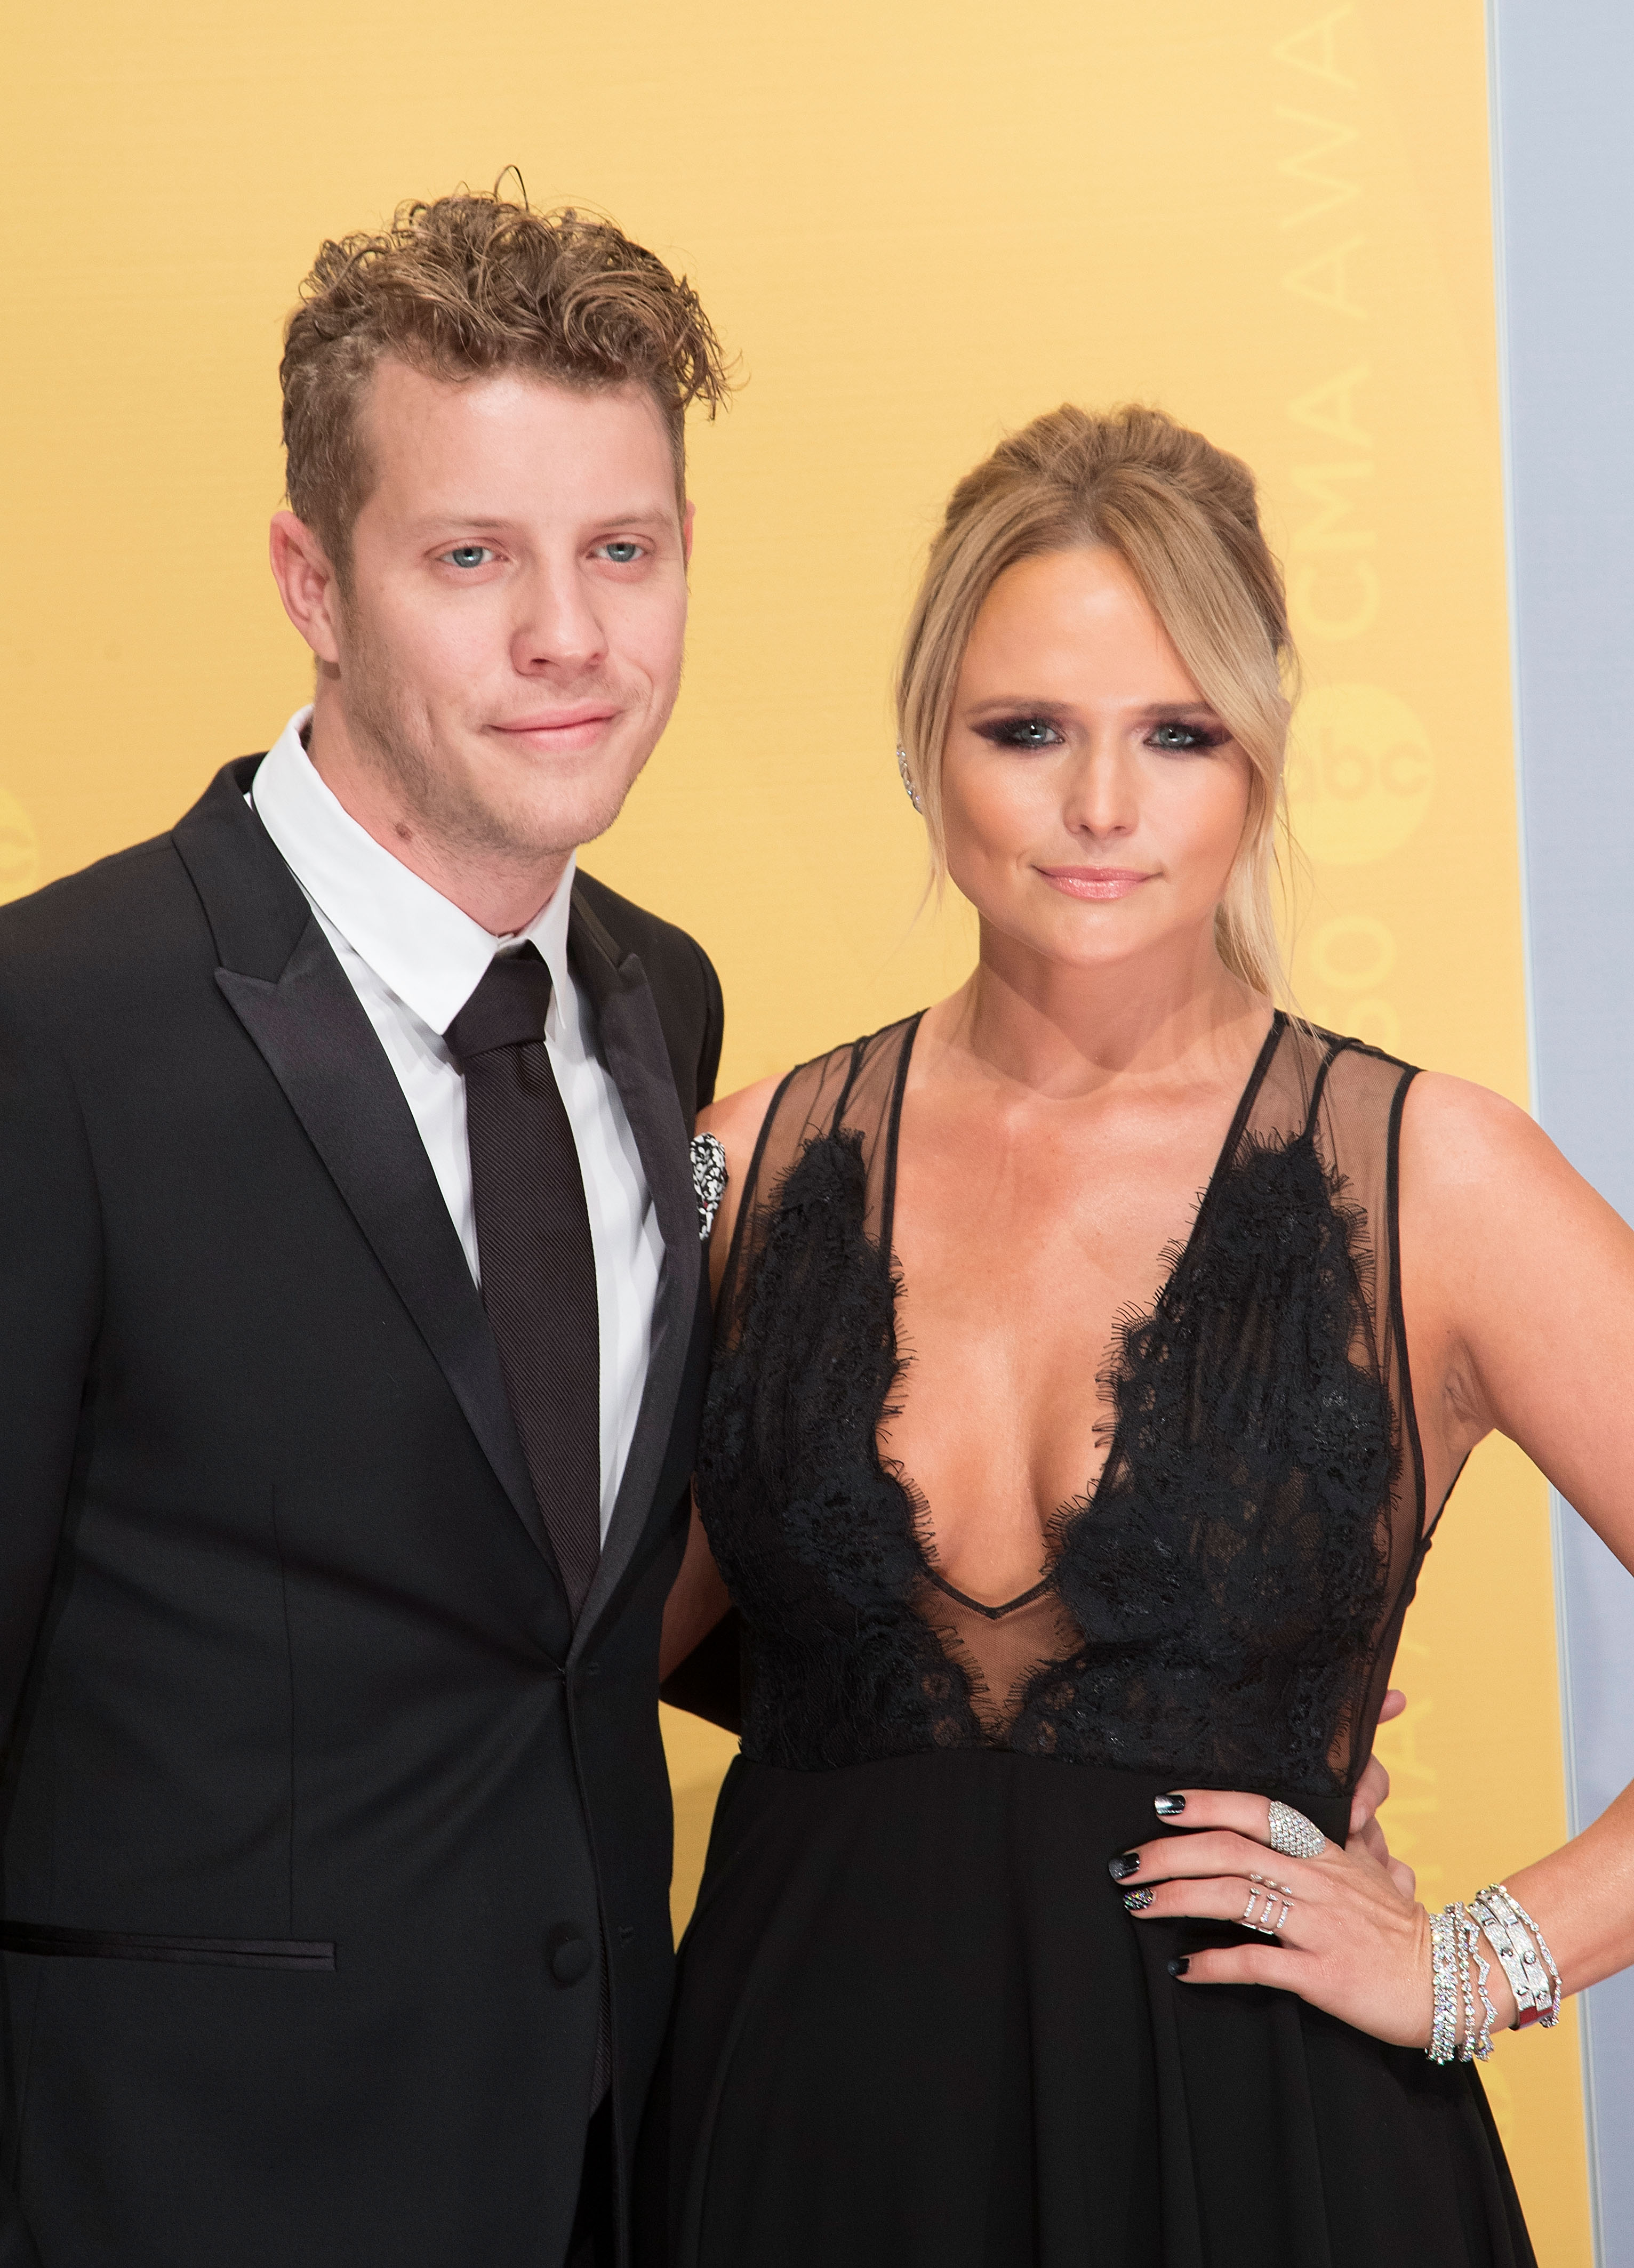 Singer-songwriter Anderson East and Miranda Lambert during the 50th annual CMA Awards at the Bridgestone Arena on November 2, 2016 in Nashville, Tennessee. | Source: Getty Images